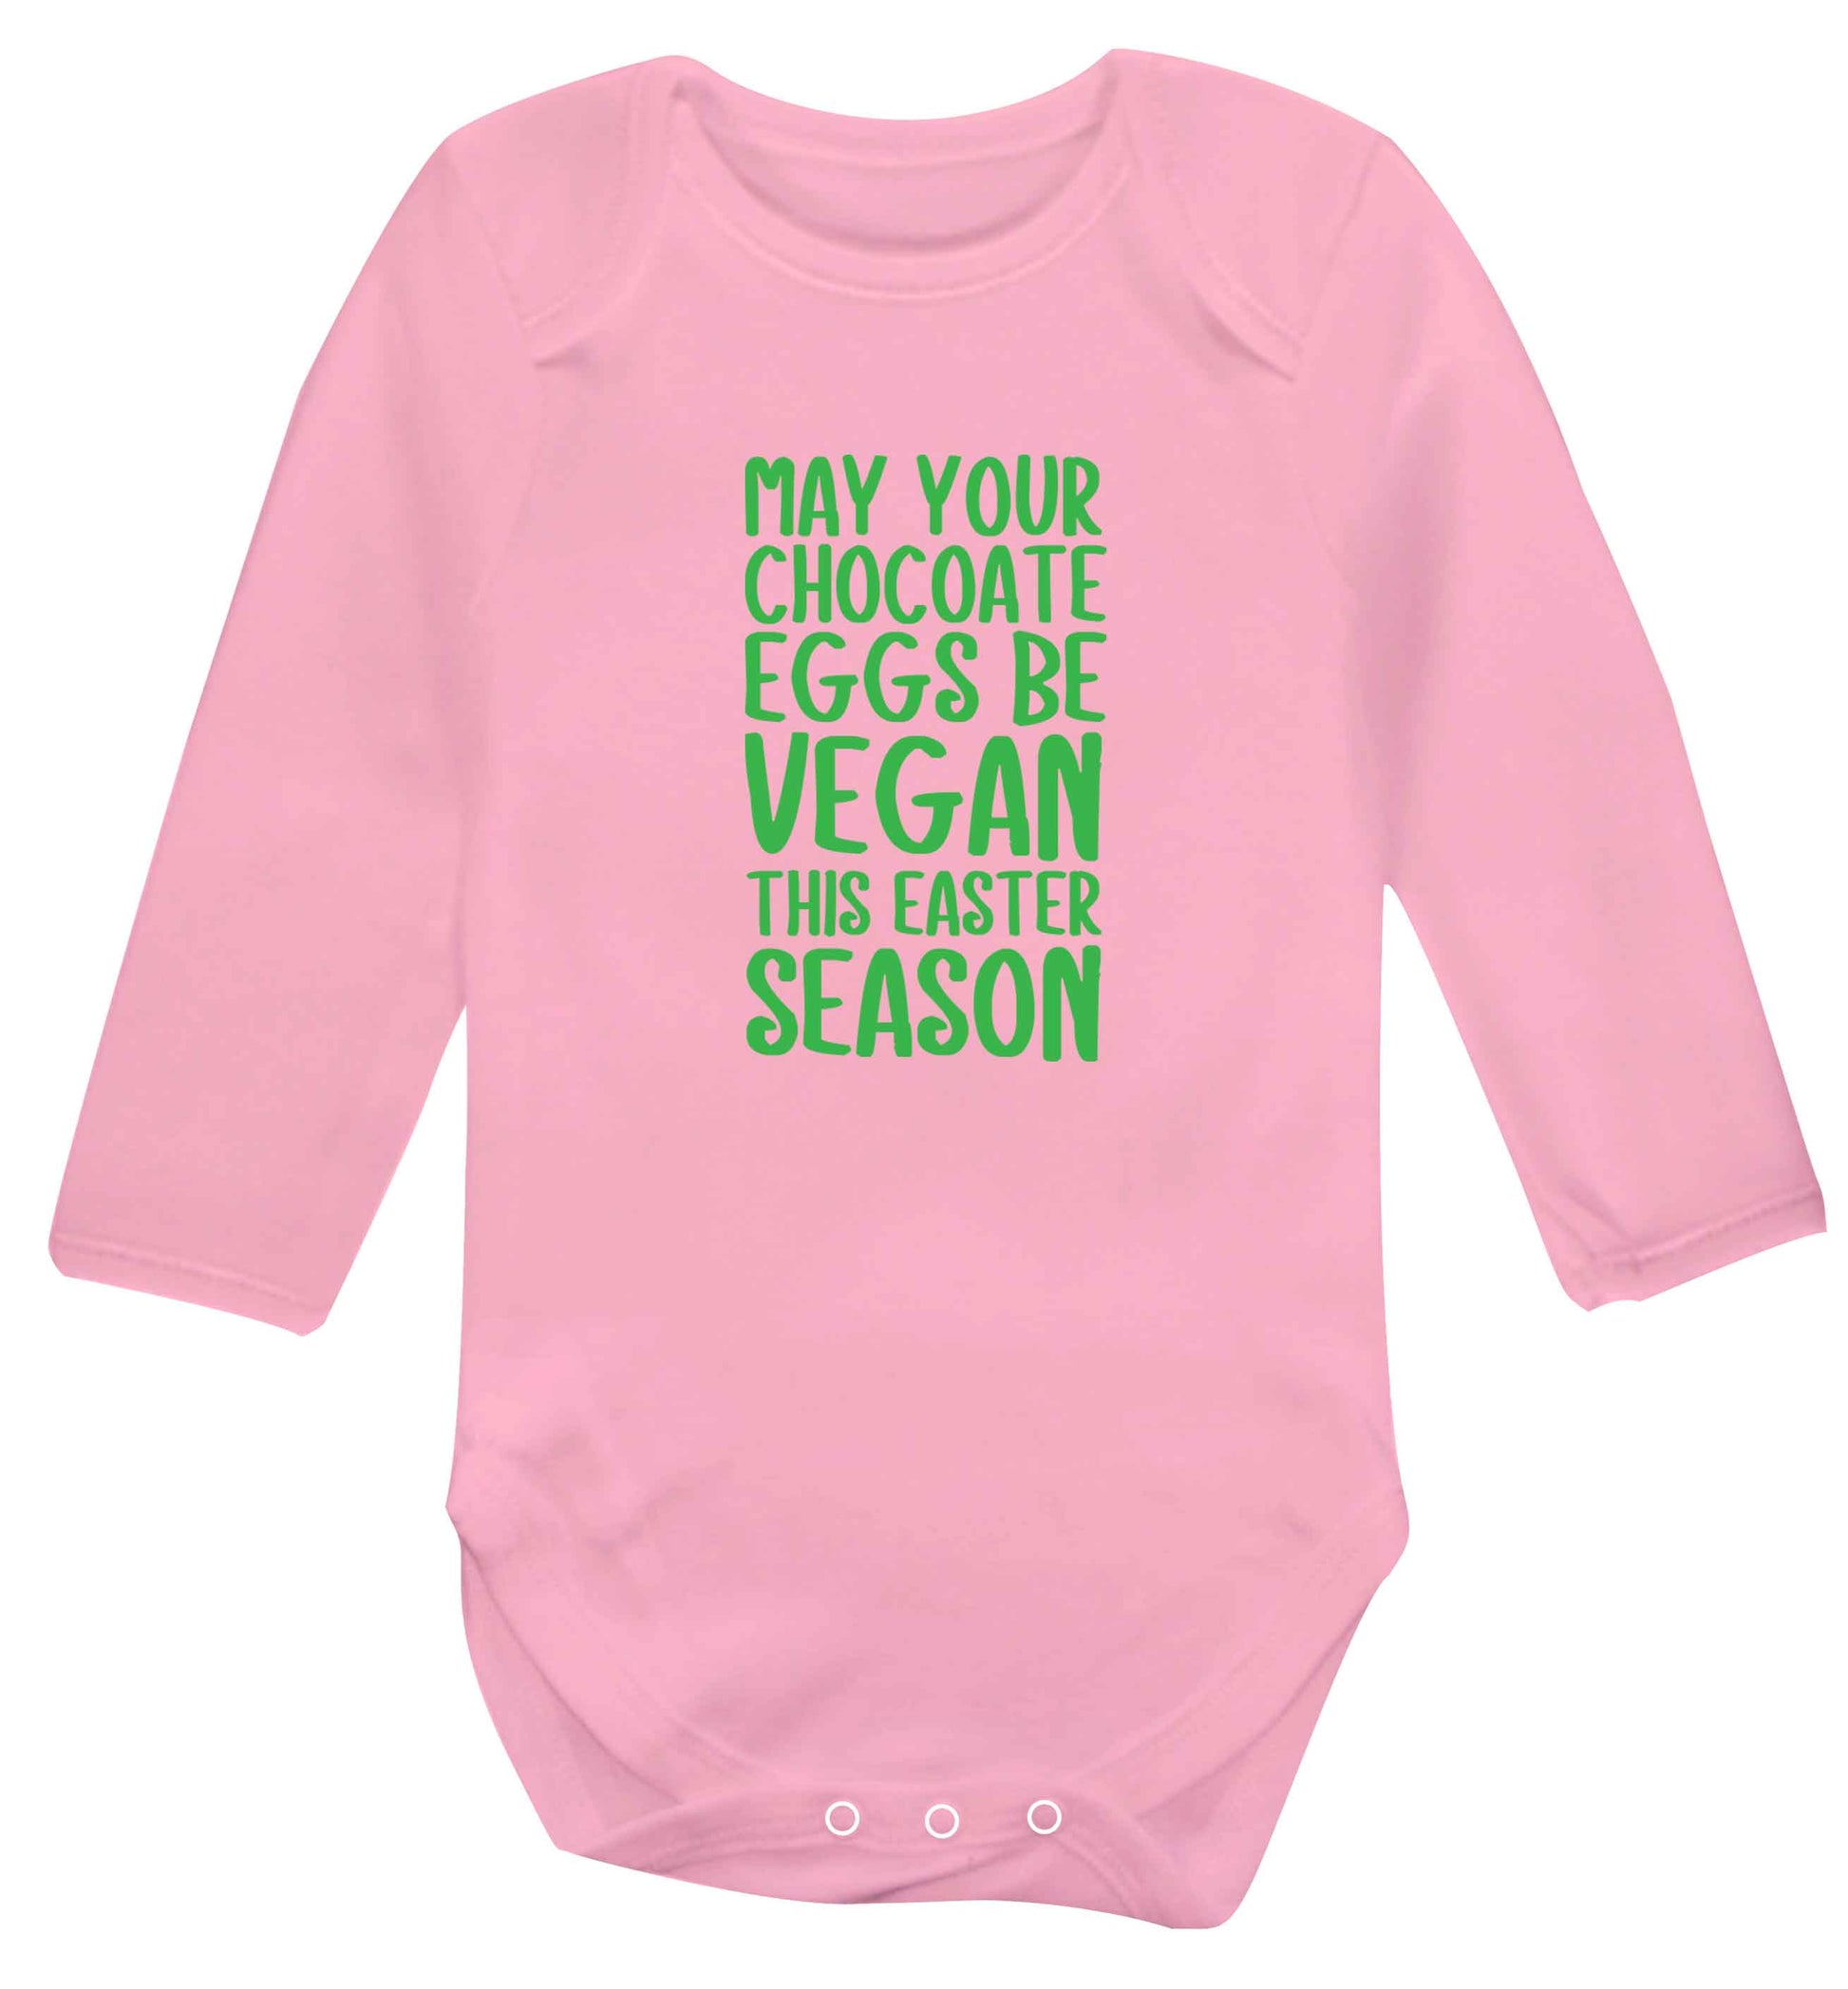 Easter bunny approved! Vegans will love this easter themed baby vest long sleeved pale pink 6-12 months